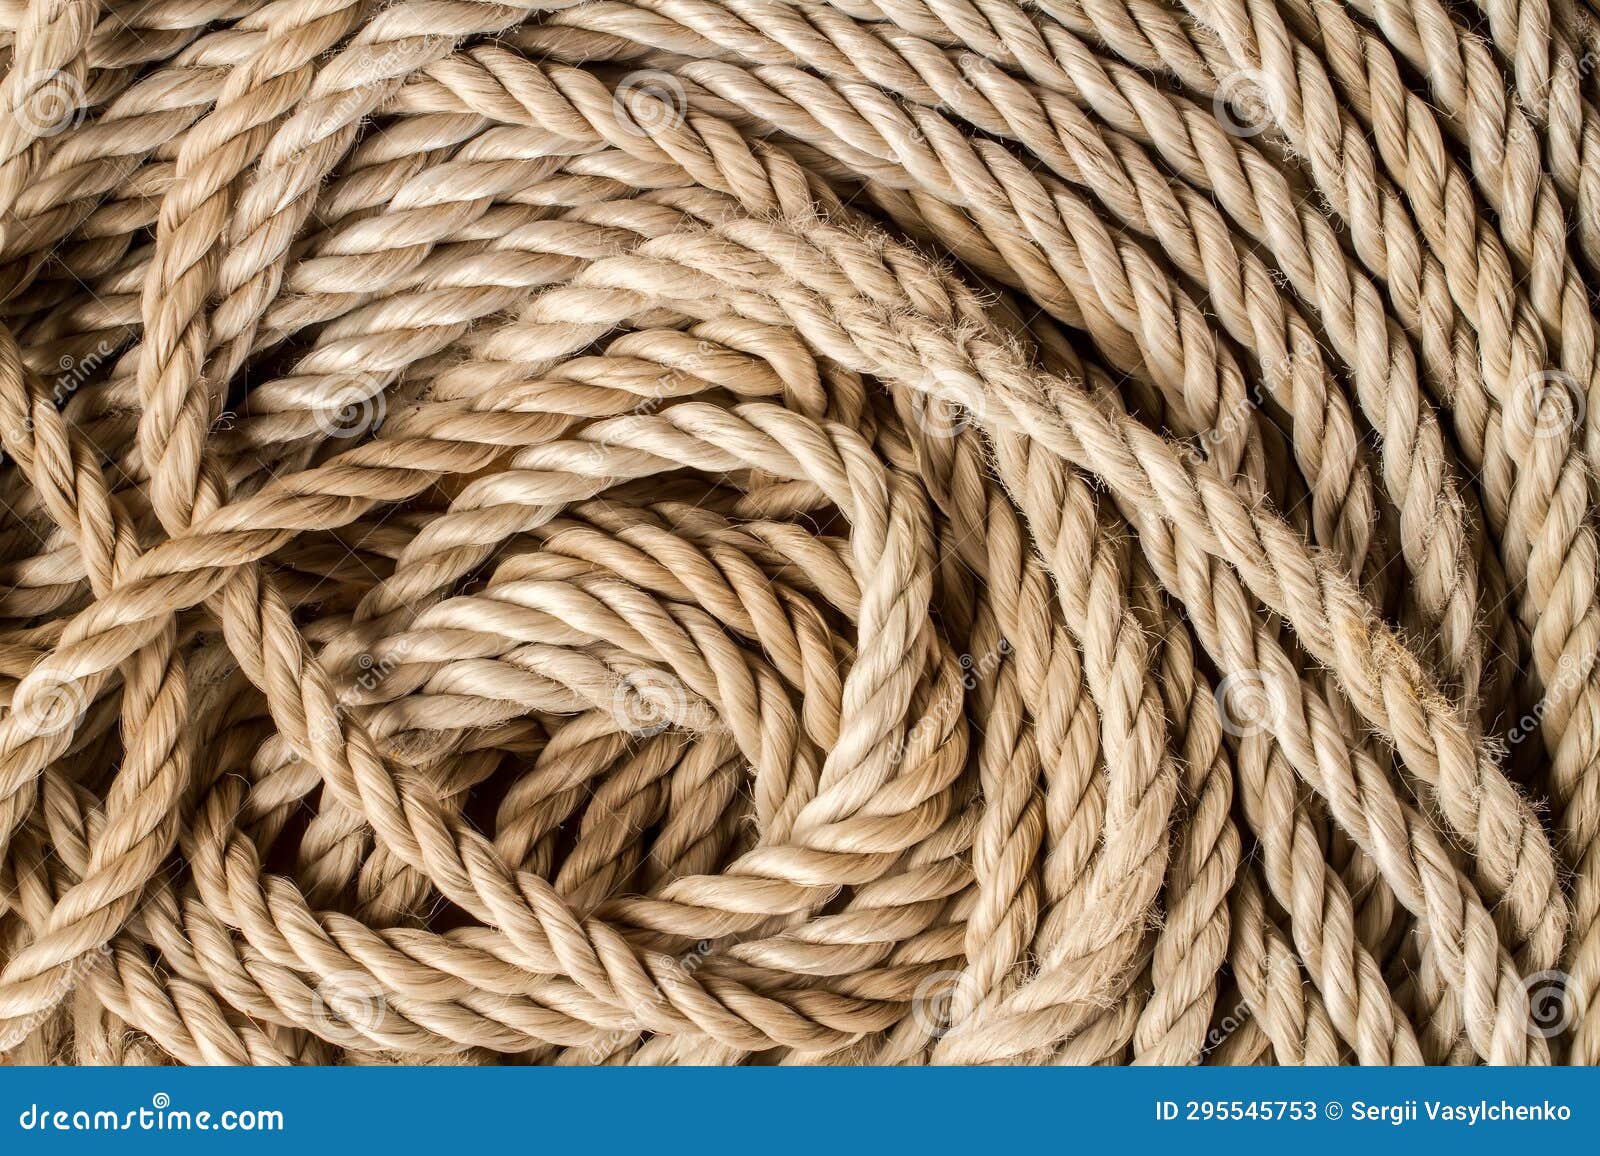 The Texture of an Intertwined Old Rope. Stock Image - Image of obsolete,  fiber: 295545753